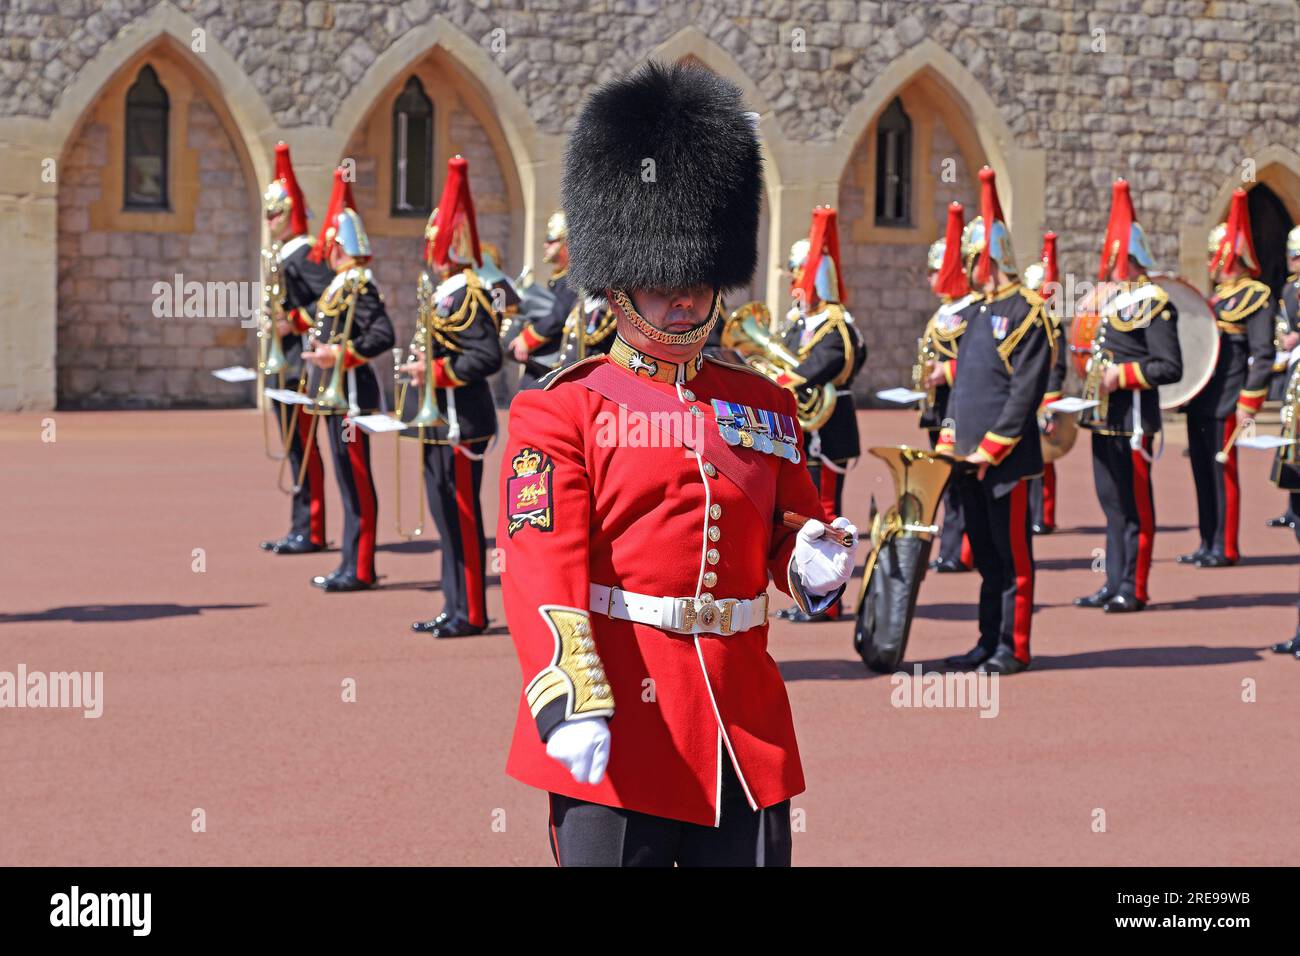 WINDSOR, GREAT BRITAIN - MAY 19, 2014: This is the ceremony of changing the guard of the Royal Guard at Windsor Castle. Stock Photo